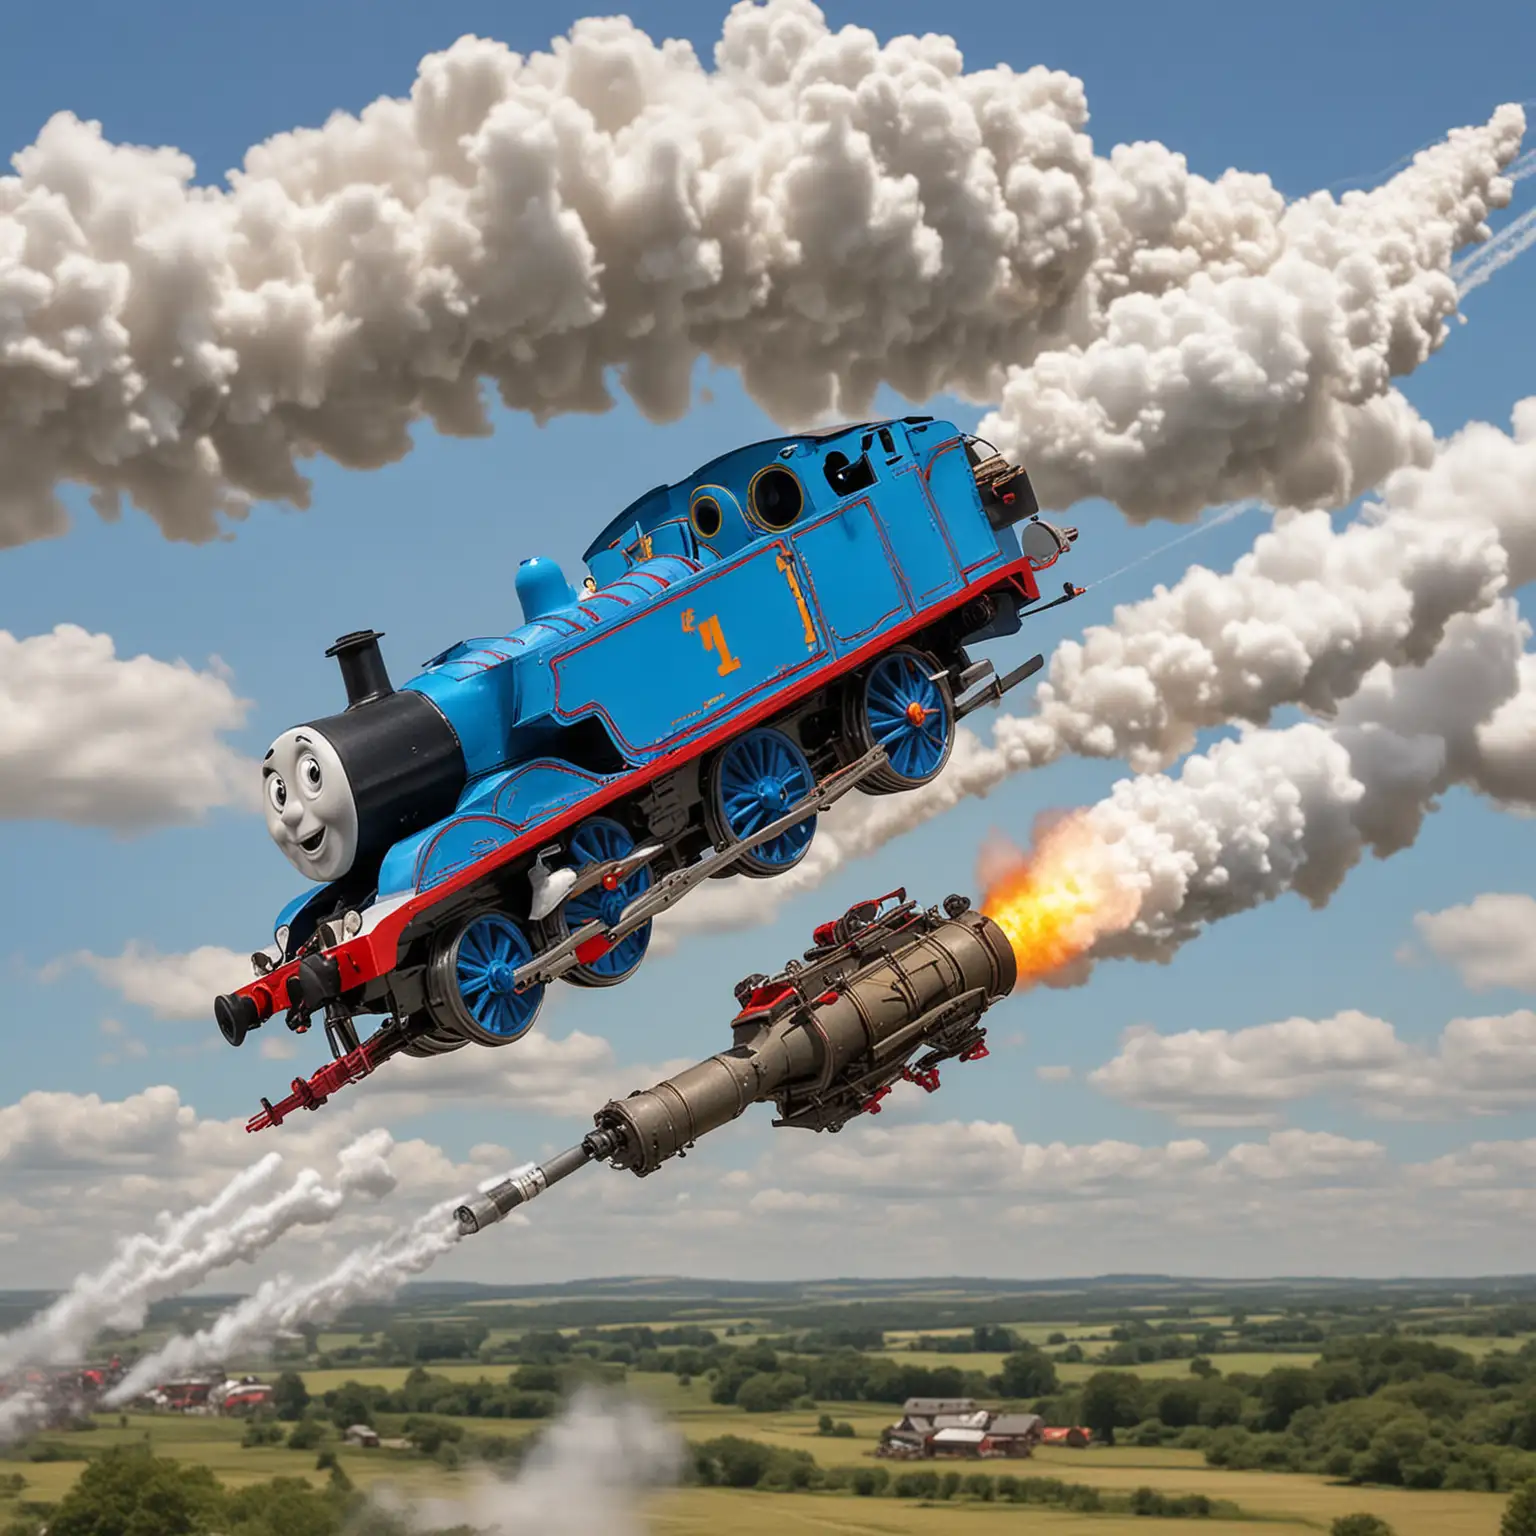 thomas the tank engine flying through the air with rocket boosters